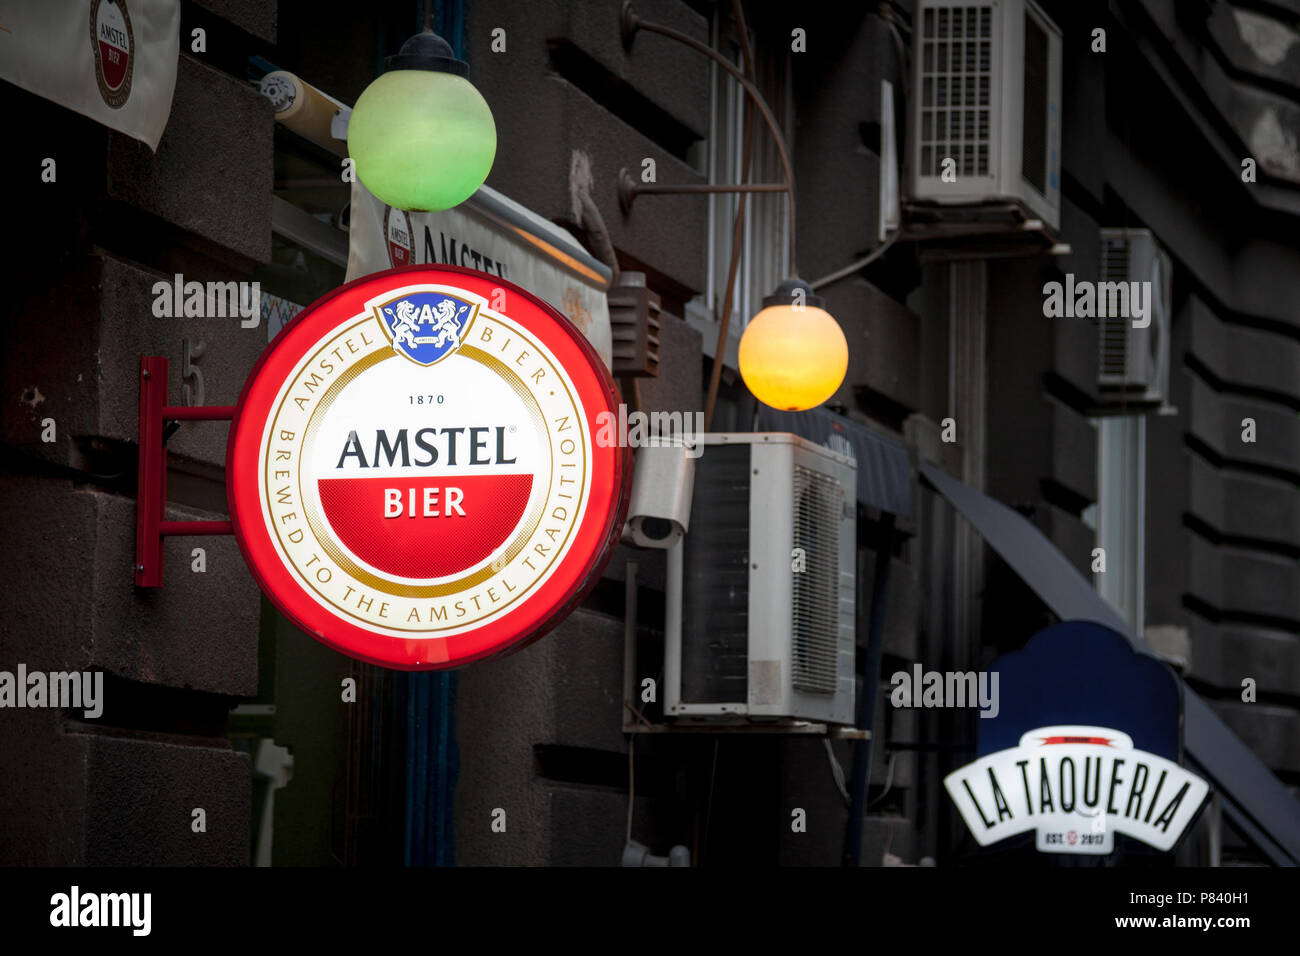 BELGRADE, SERBIA - JULY 7, 2018: Logo of Amstel beer on a bar sign with its distinctive visual. Amstel is a Dutch light pilsner beer produced in Amste Stock Photo